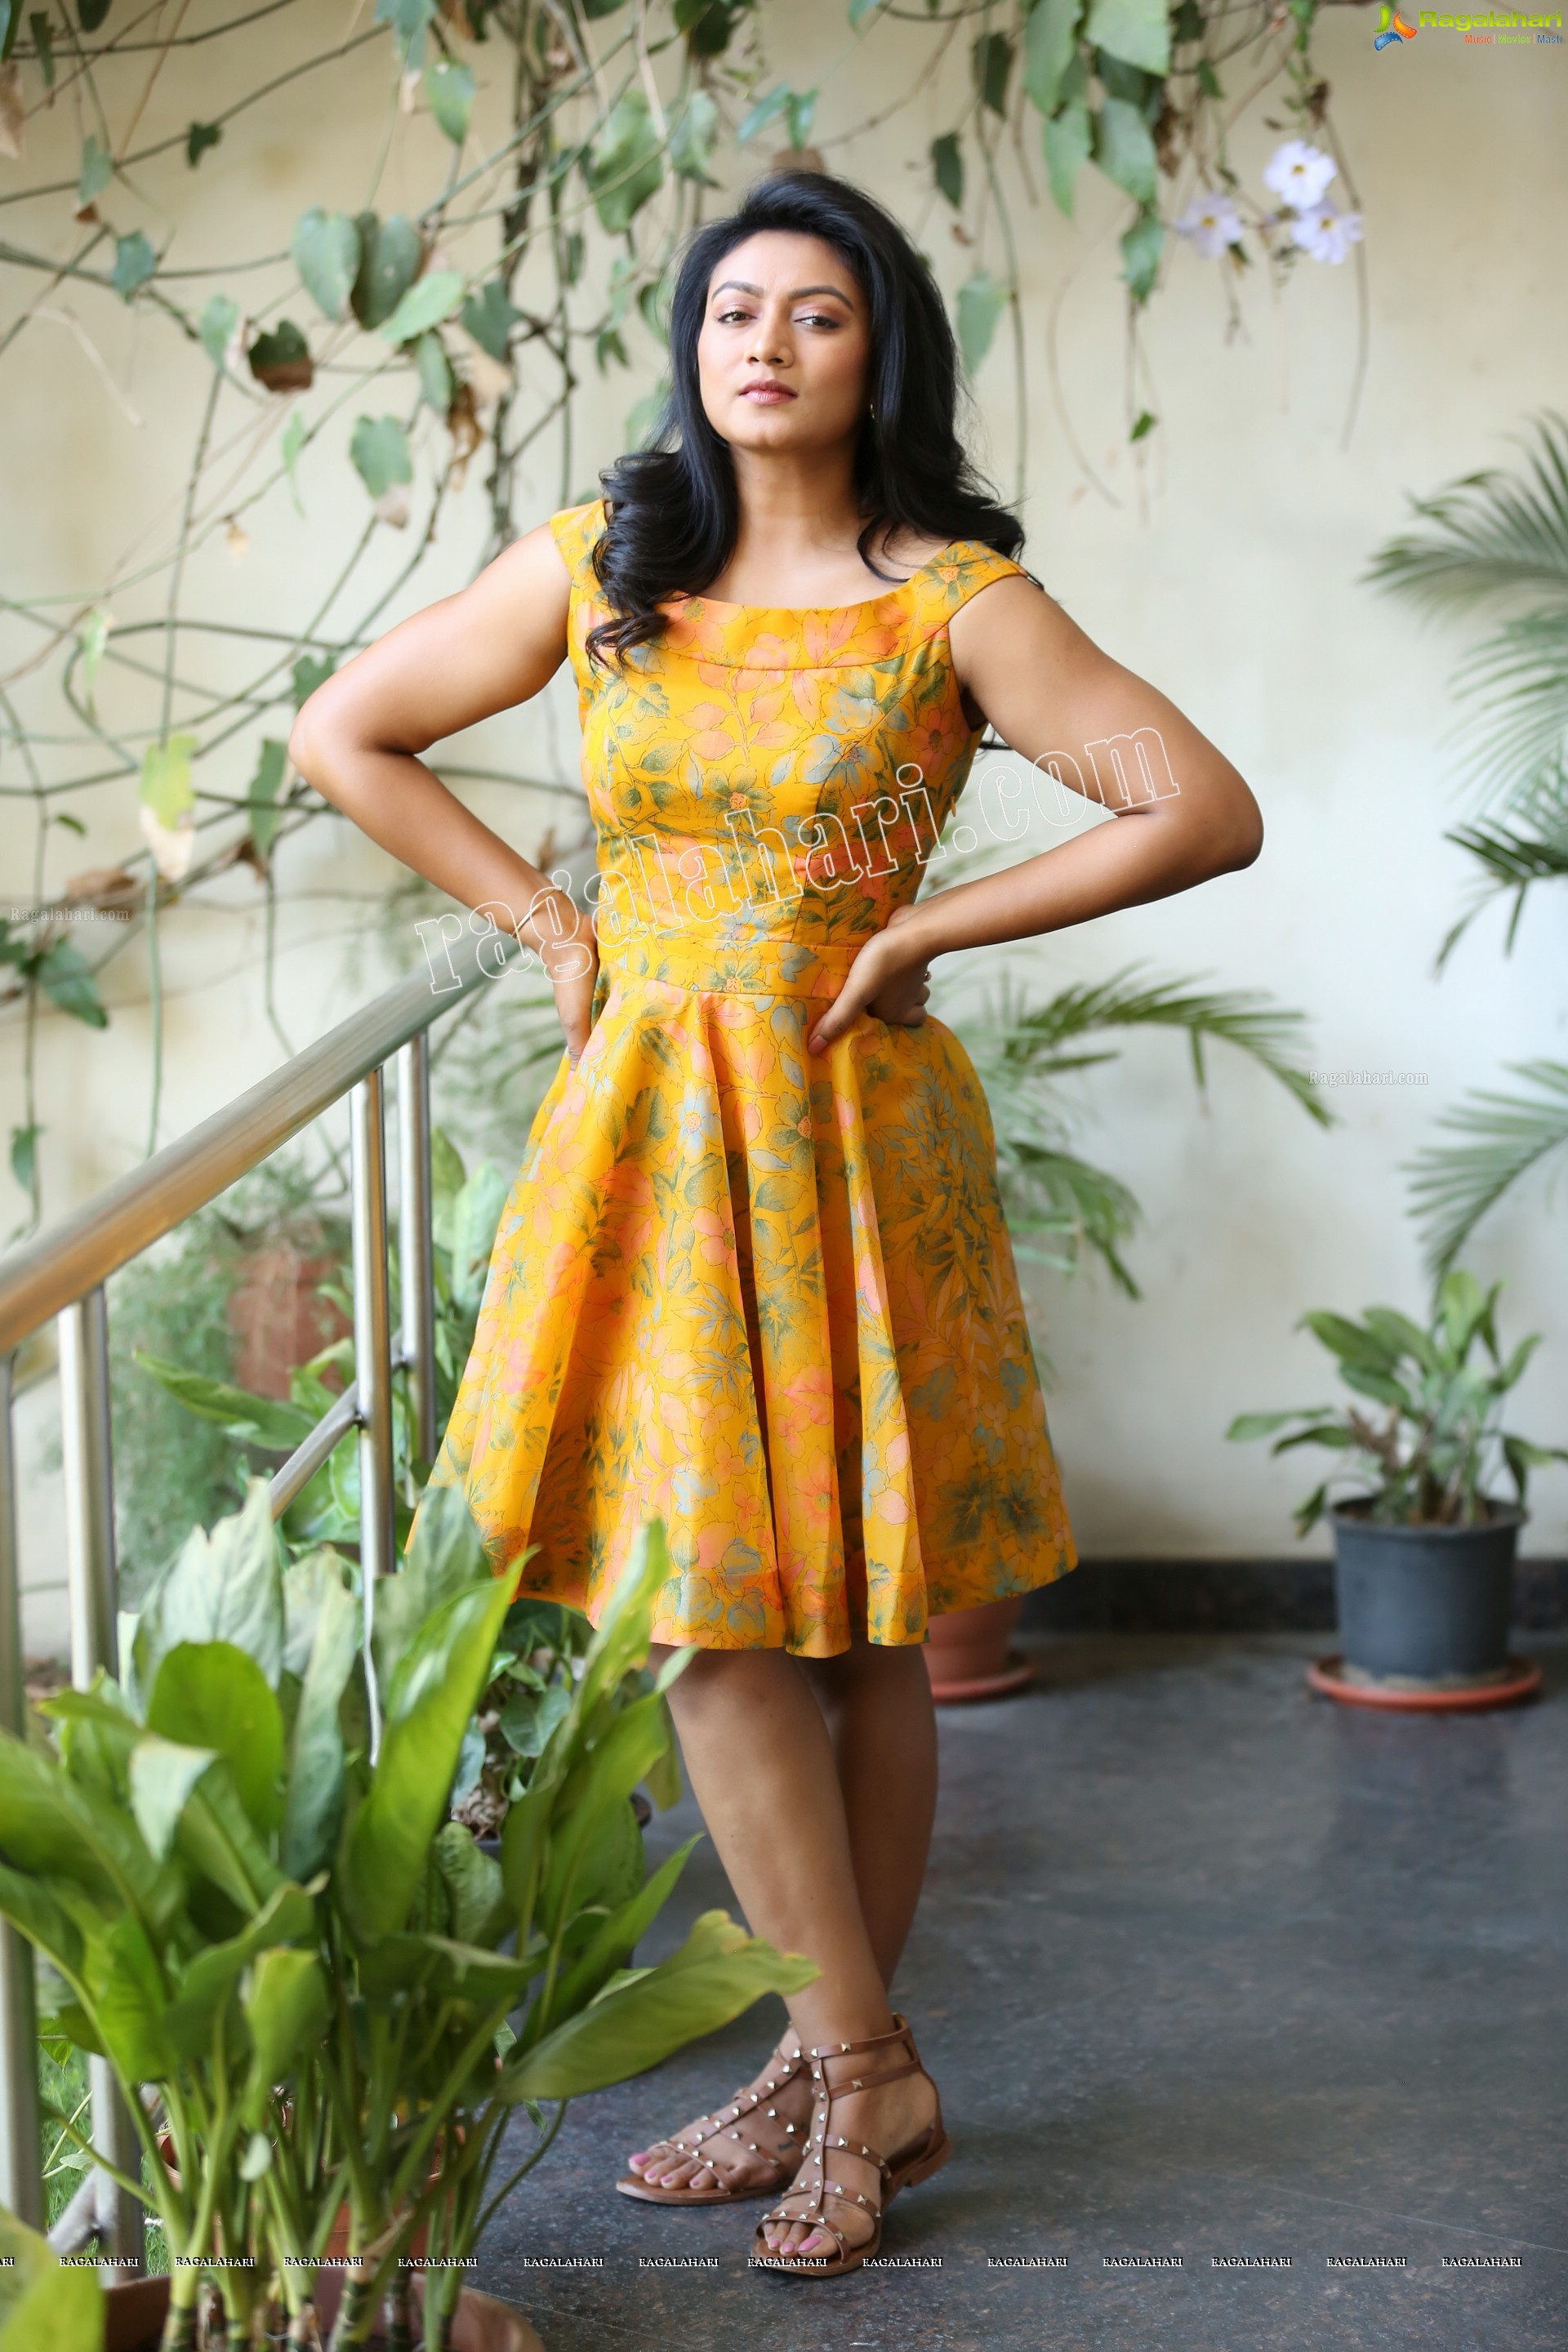 Ashmitha Karnani in Yellow Off-Shoulder Floral Dress Exclusive Photo Shoot